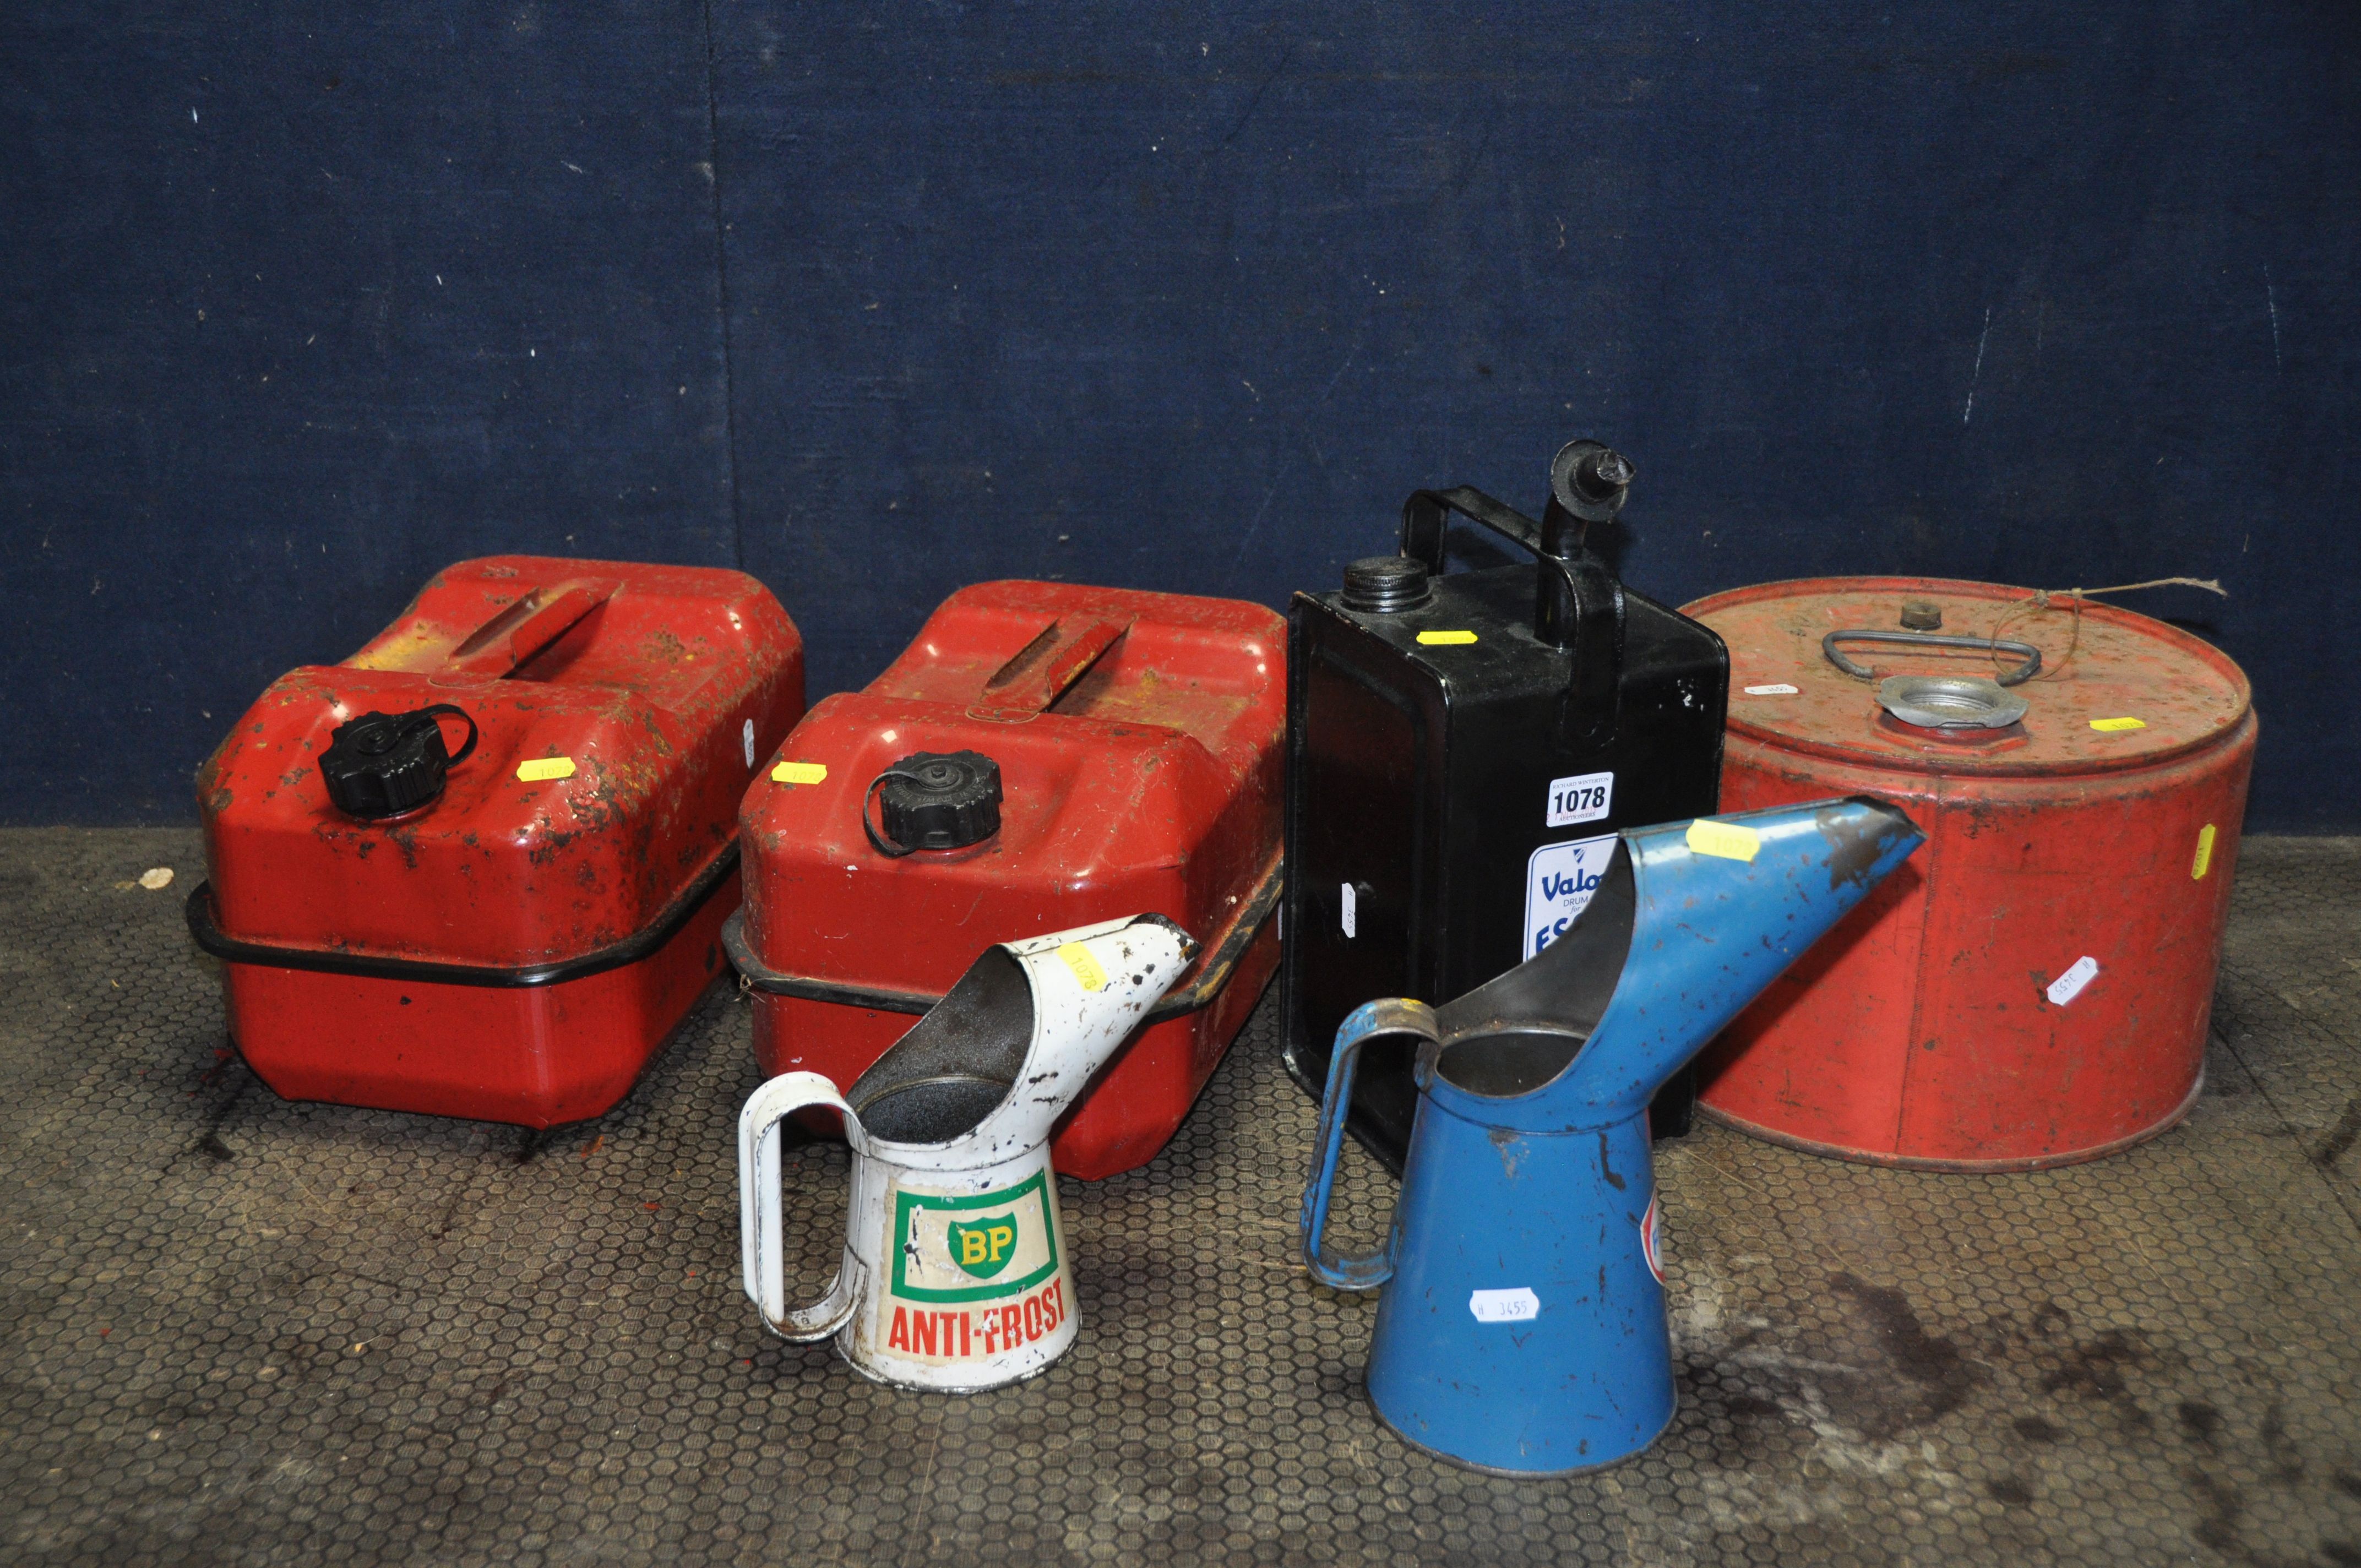 TEN VINTAGE FUEL AND OIL CANS including a Fina and a BP oil cans, two petrol cans, a Valor